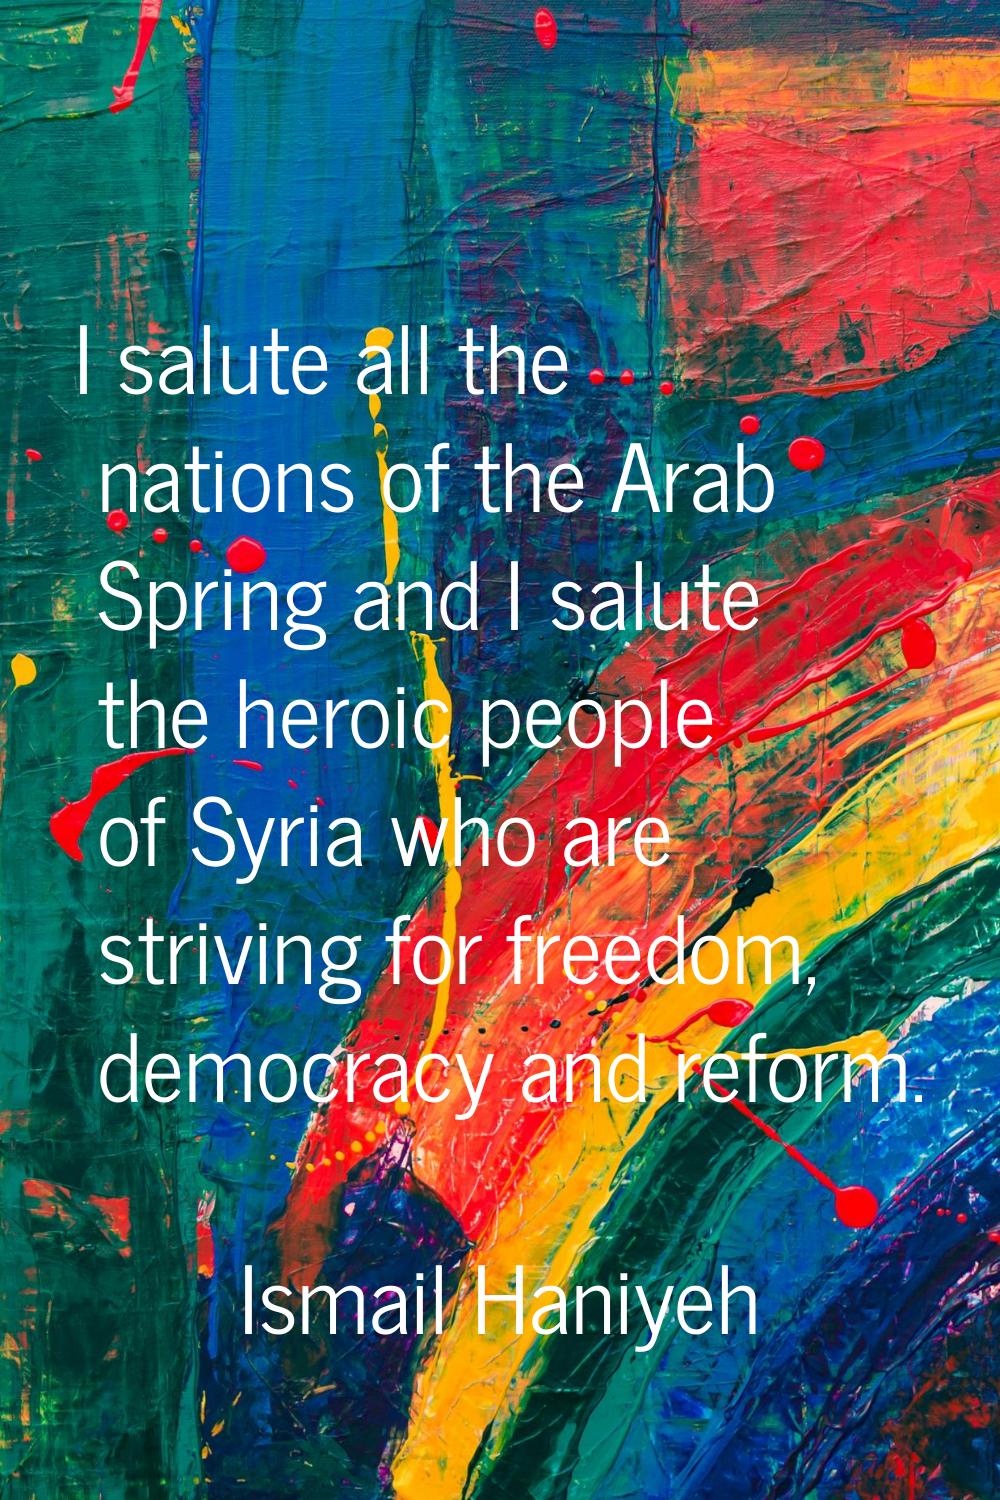 I salute all the nations of the Arab Spring and I salute the heroic people of Syria who are strivin